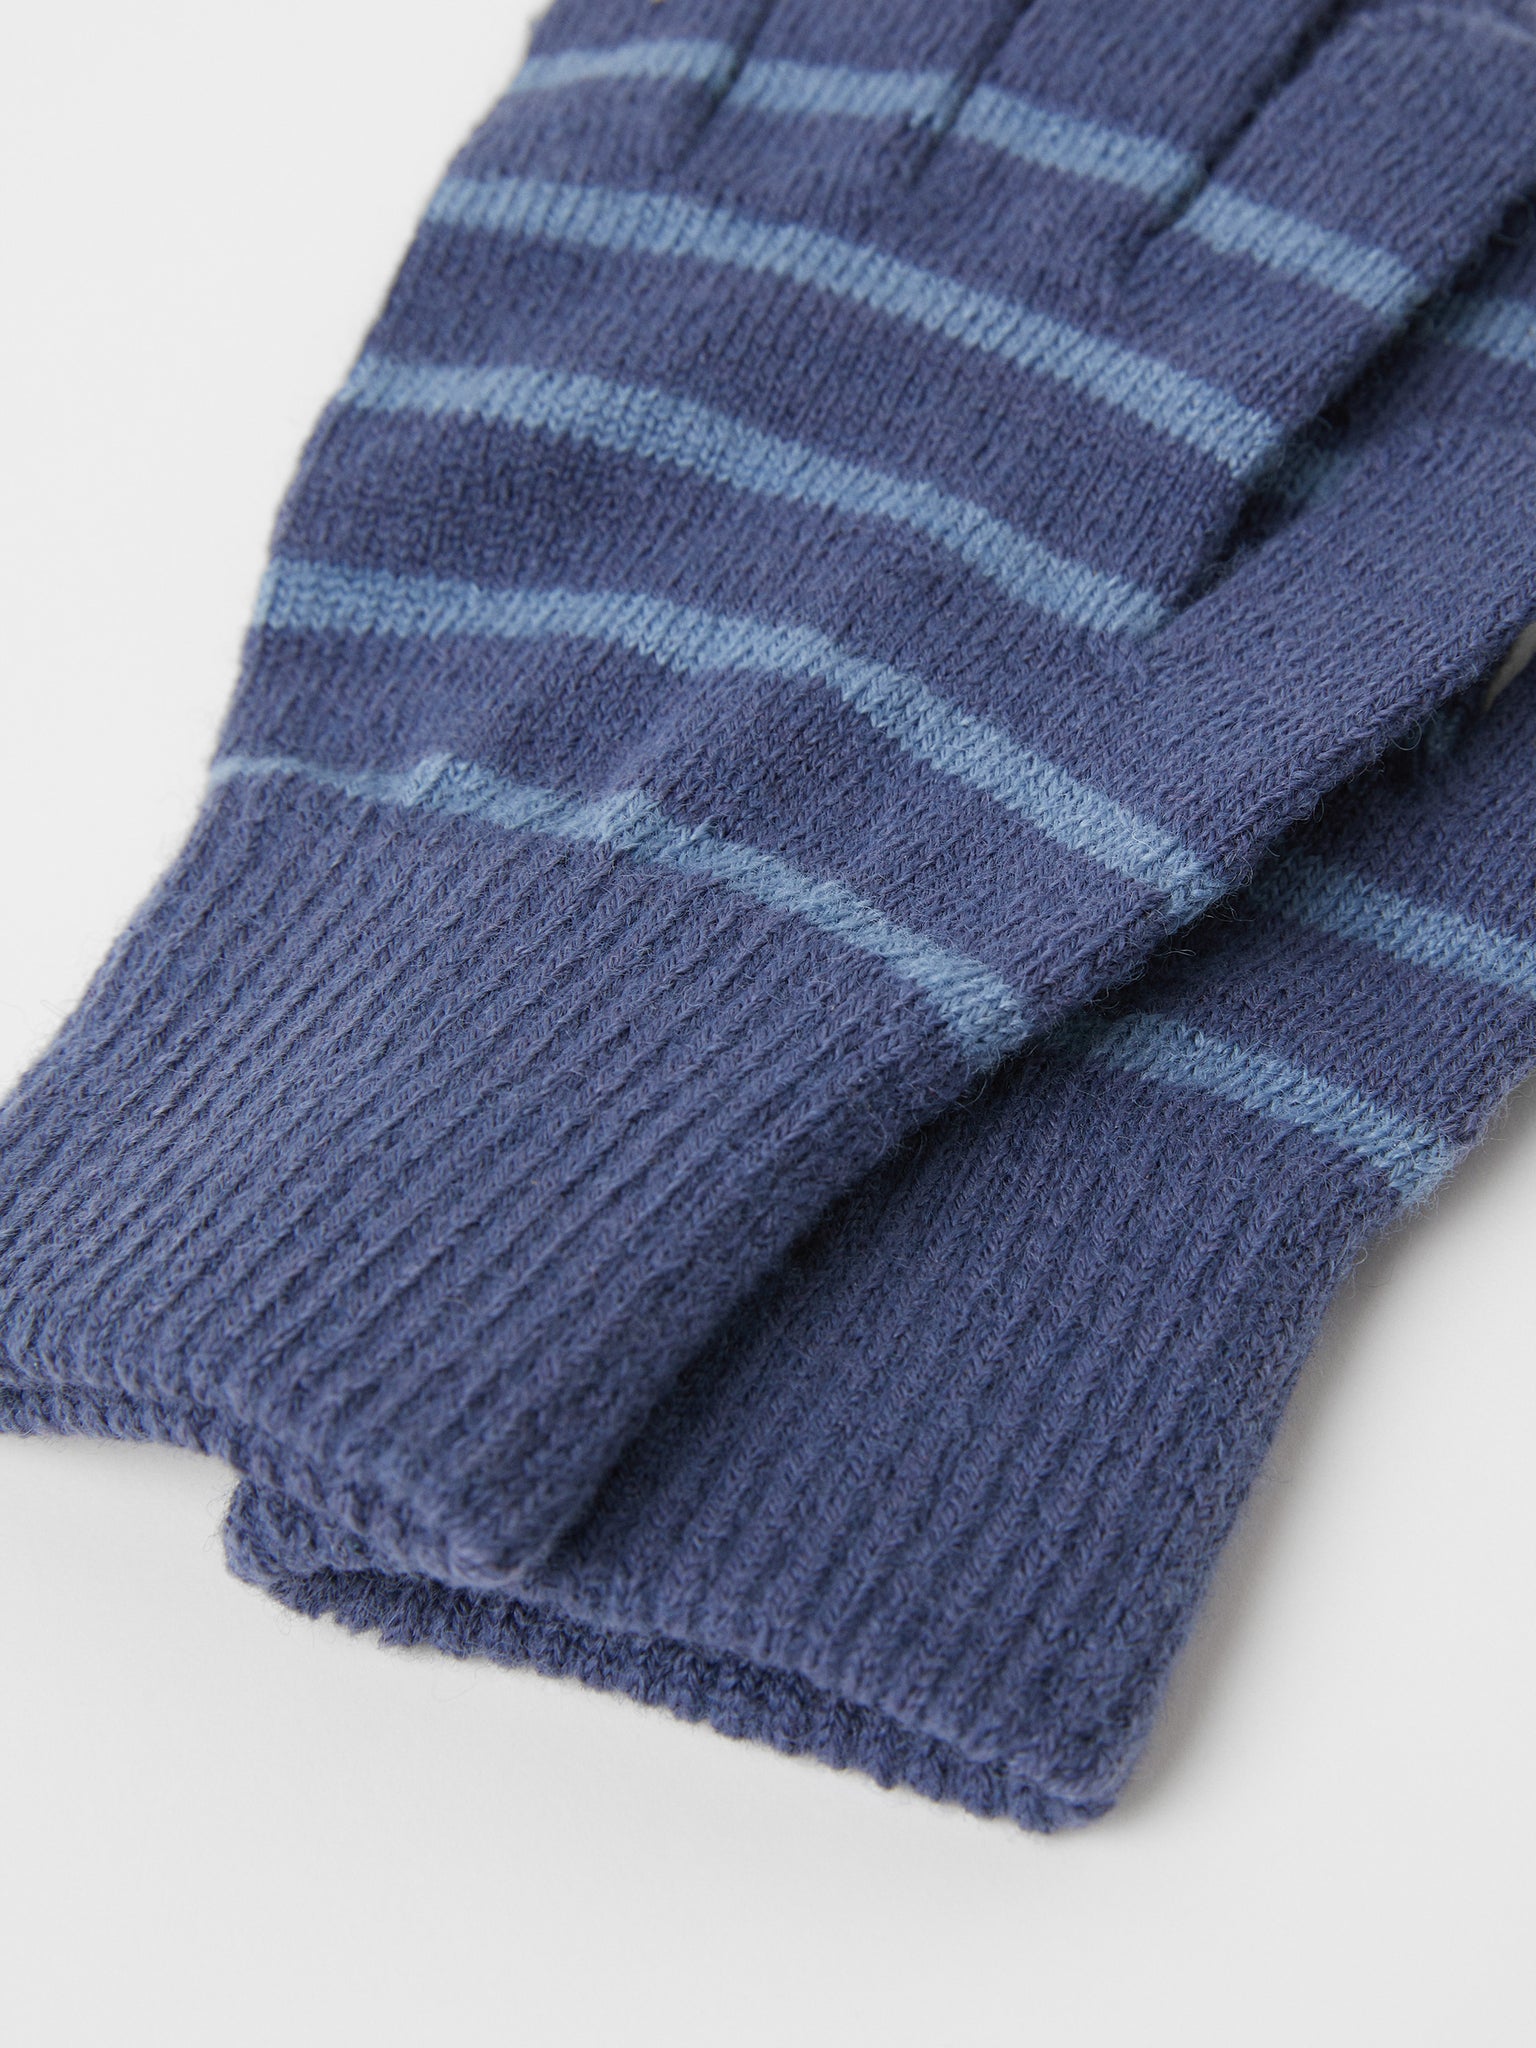 Blue Kids Wool Magic Gloves from the Polarn O. Pyret outerwear collection. Quality kids clothing made to last.